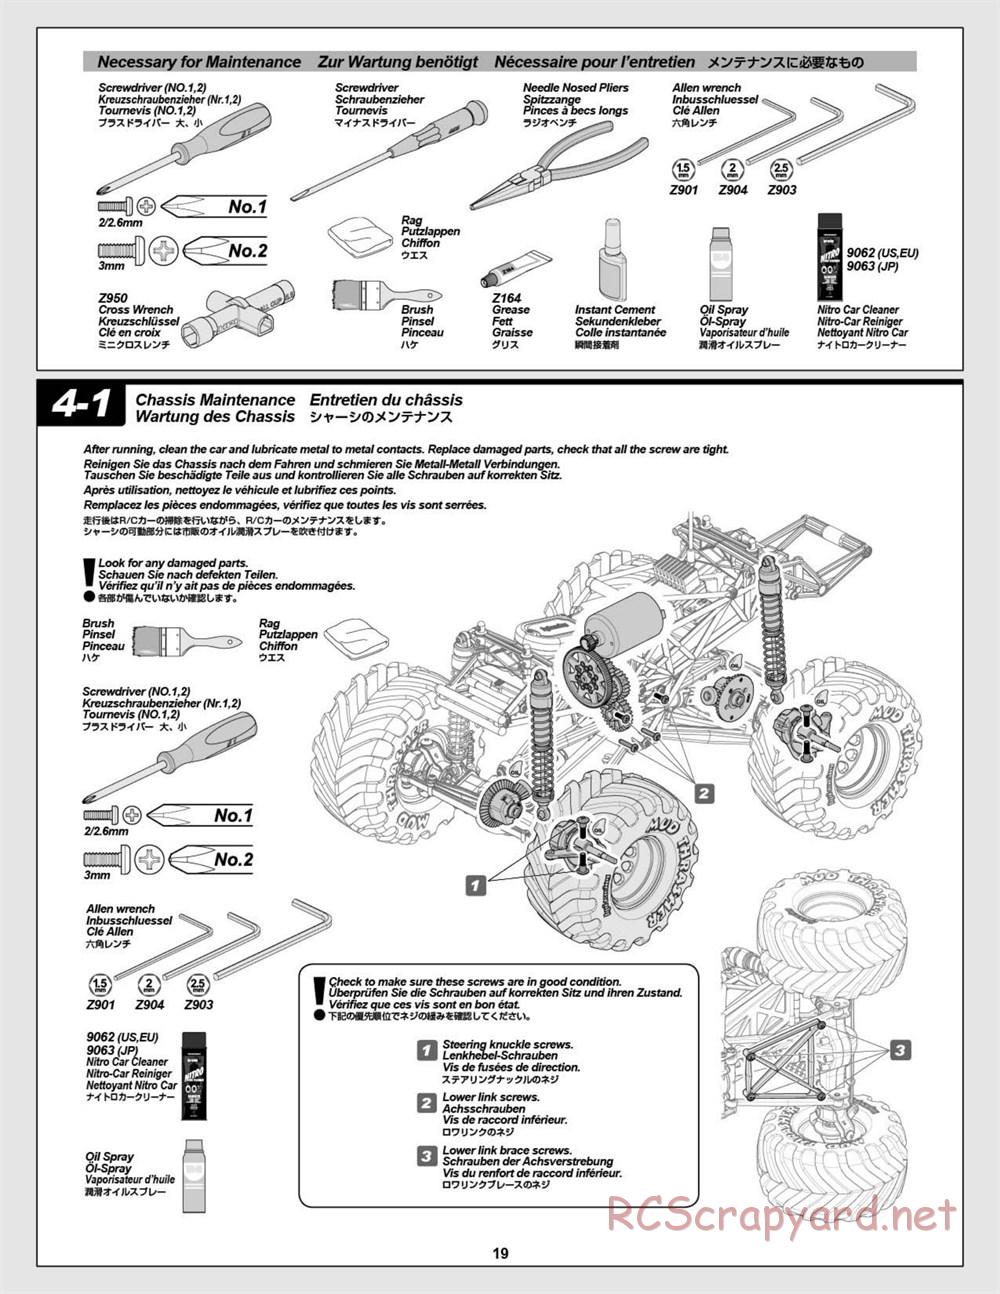 HPI - Wheely King 4x4 - Manual - Page 19